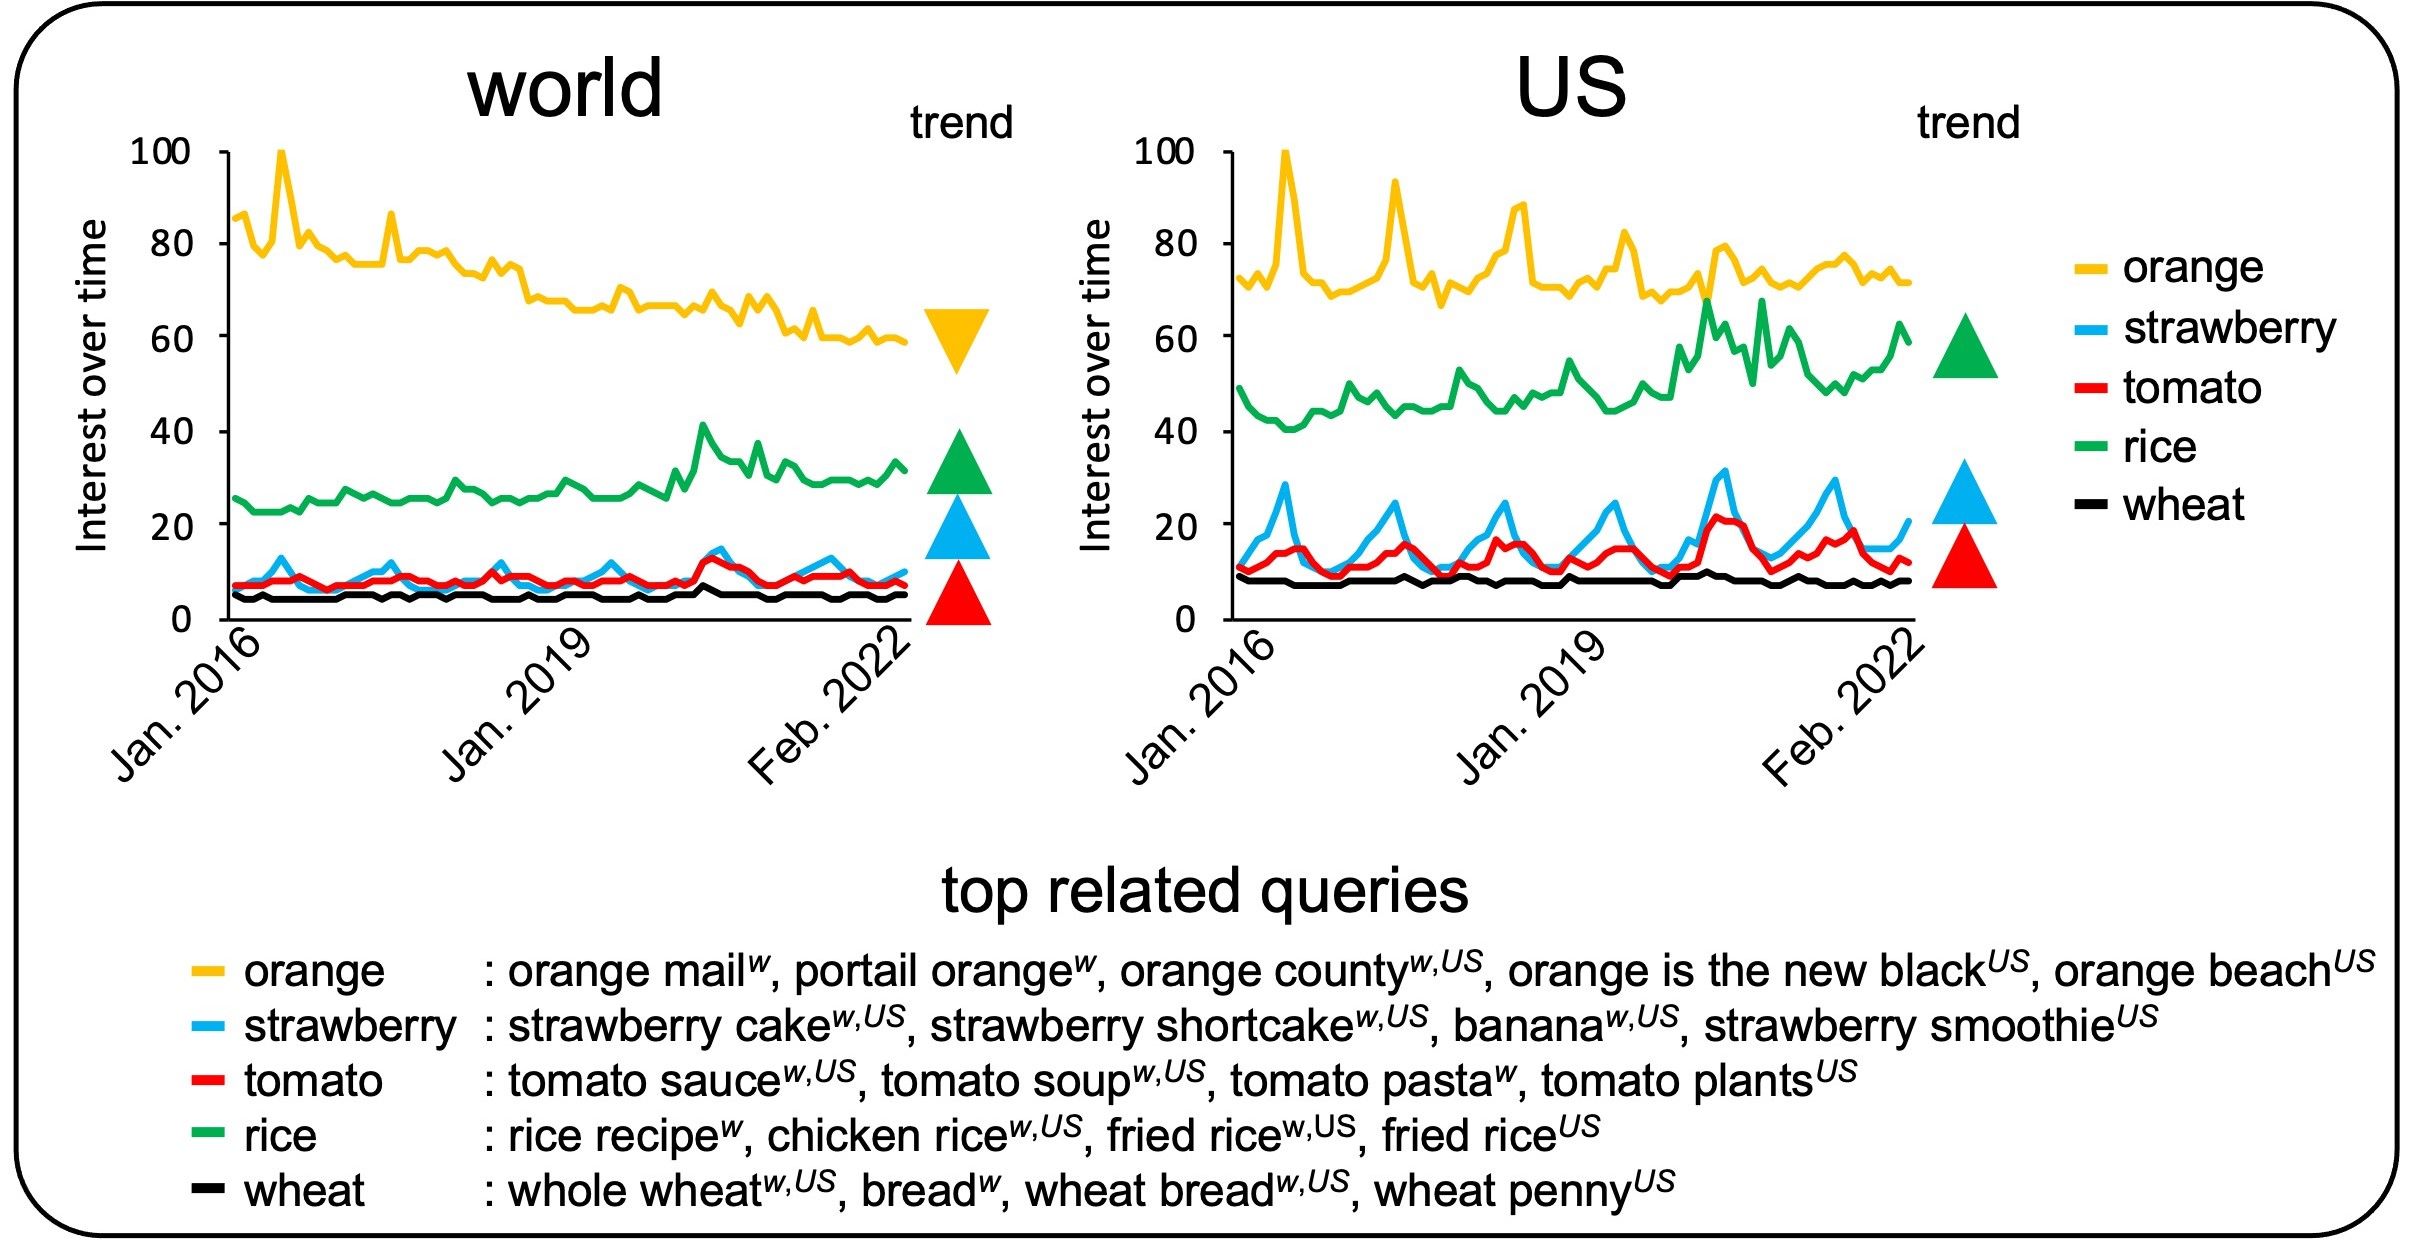 Search trends for “orange,” “strawberry,” “tomato,” “rice,” and “wheat.” Ascending or descending triangles are shown if the change in search interest was statistically significant. Each triangle is color-coded based on the figure legend. Superscripts w and US indicate the top related queries in the world and the US, respectively.